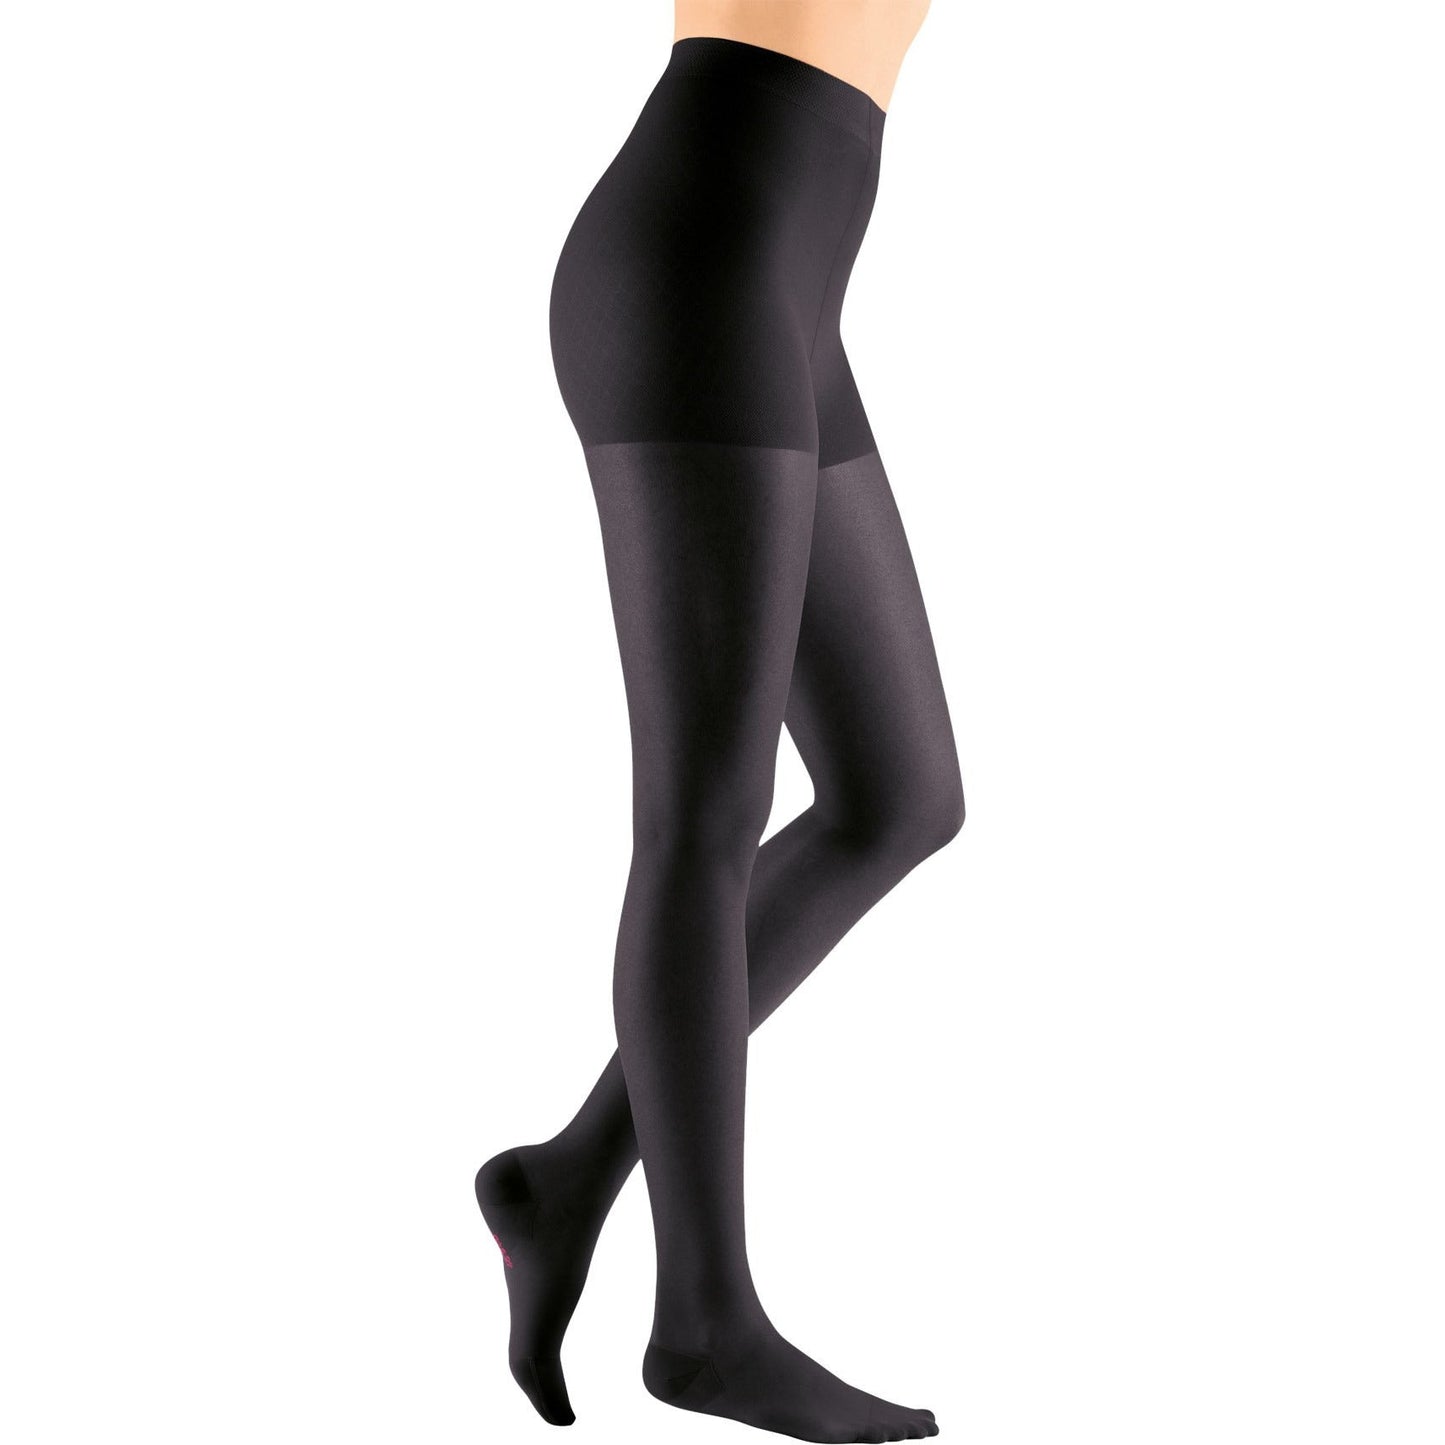 Mediven Soft and Sheer Compression Pantyhose 30-40mmHg – Compression  Stockings